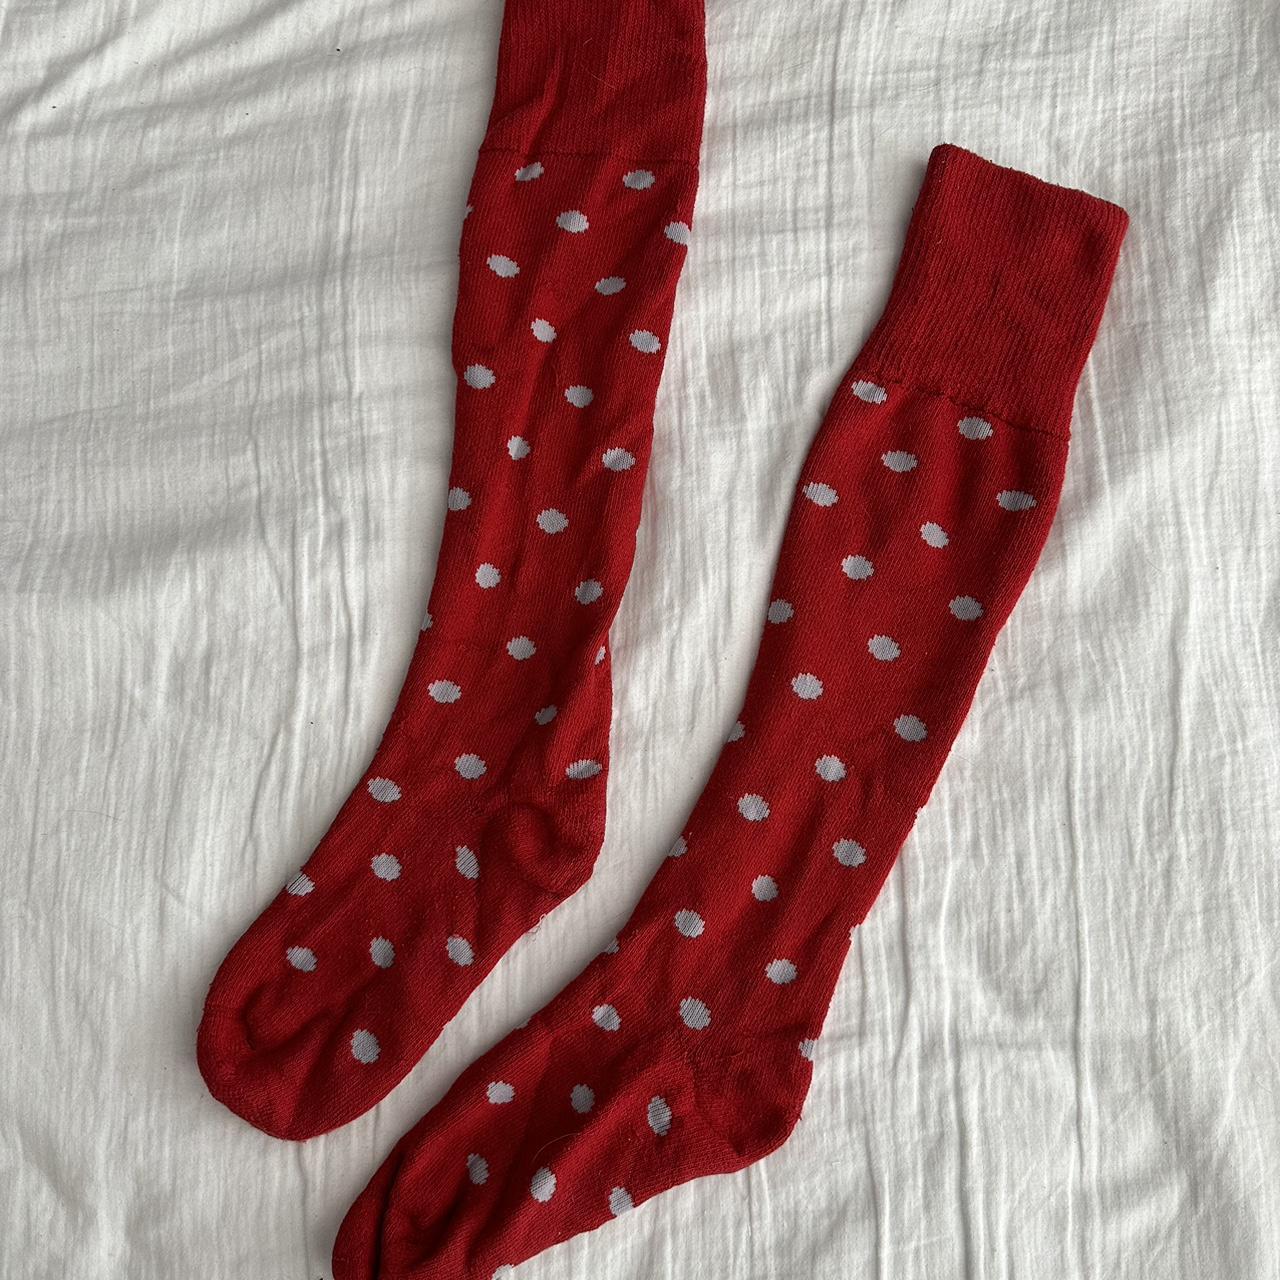 Thick red with grey dots knee socks - Depop